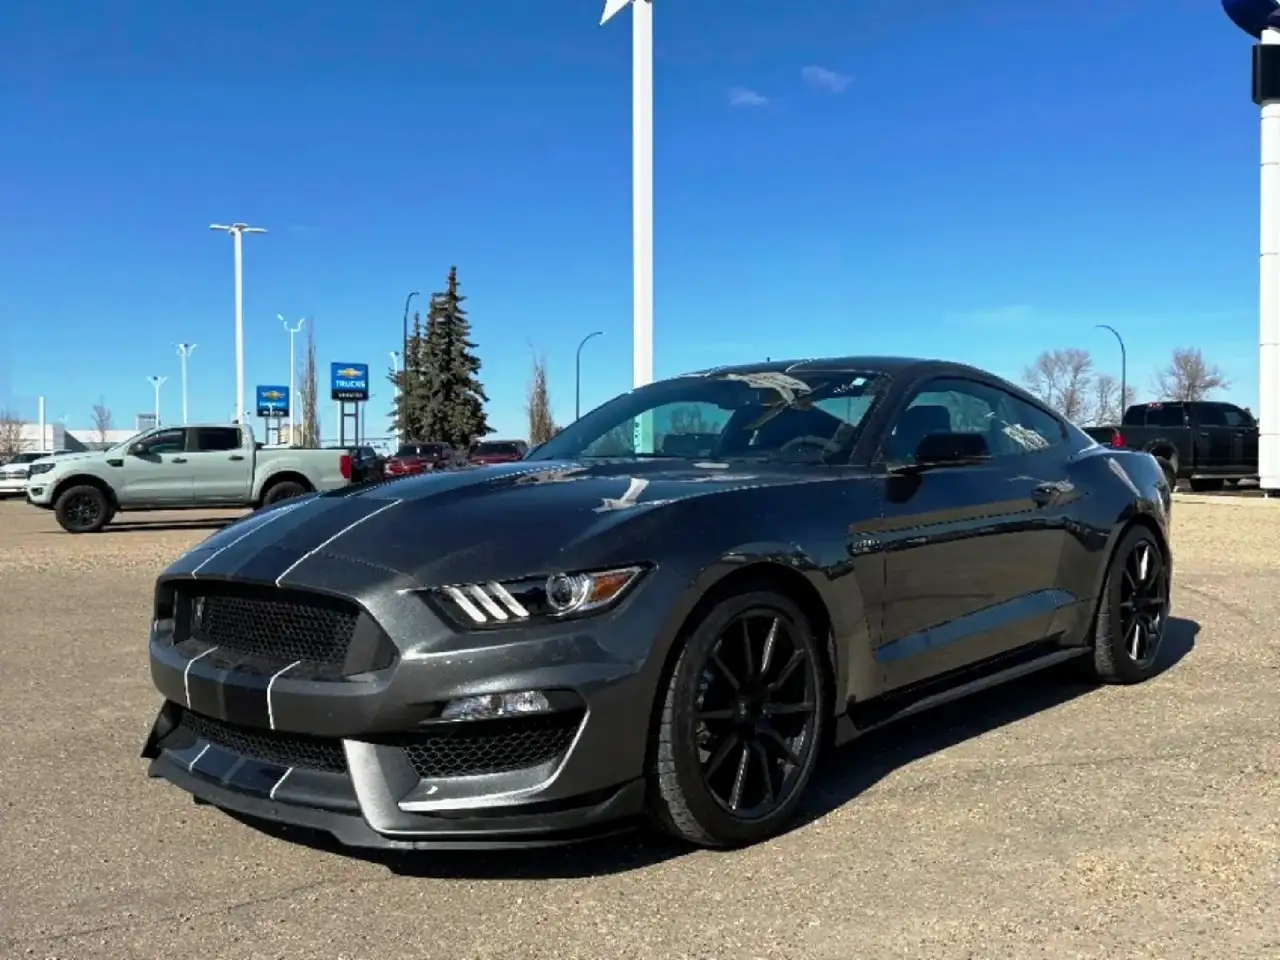 2016 - Ford Mustang Mustang Boîte manuelle Coupé